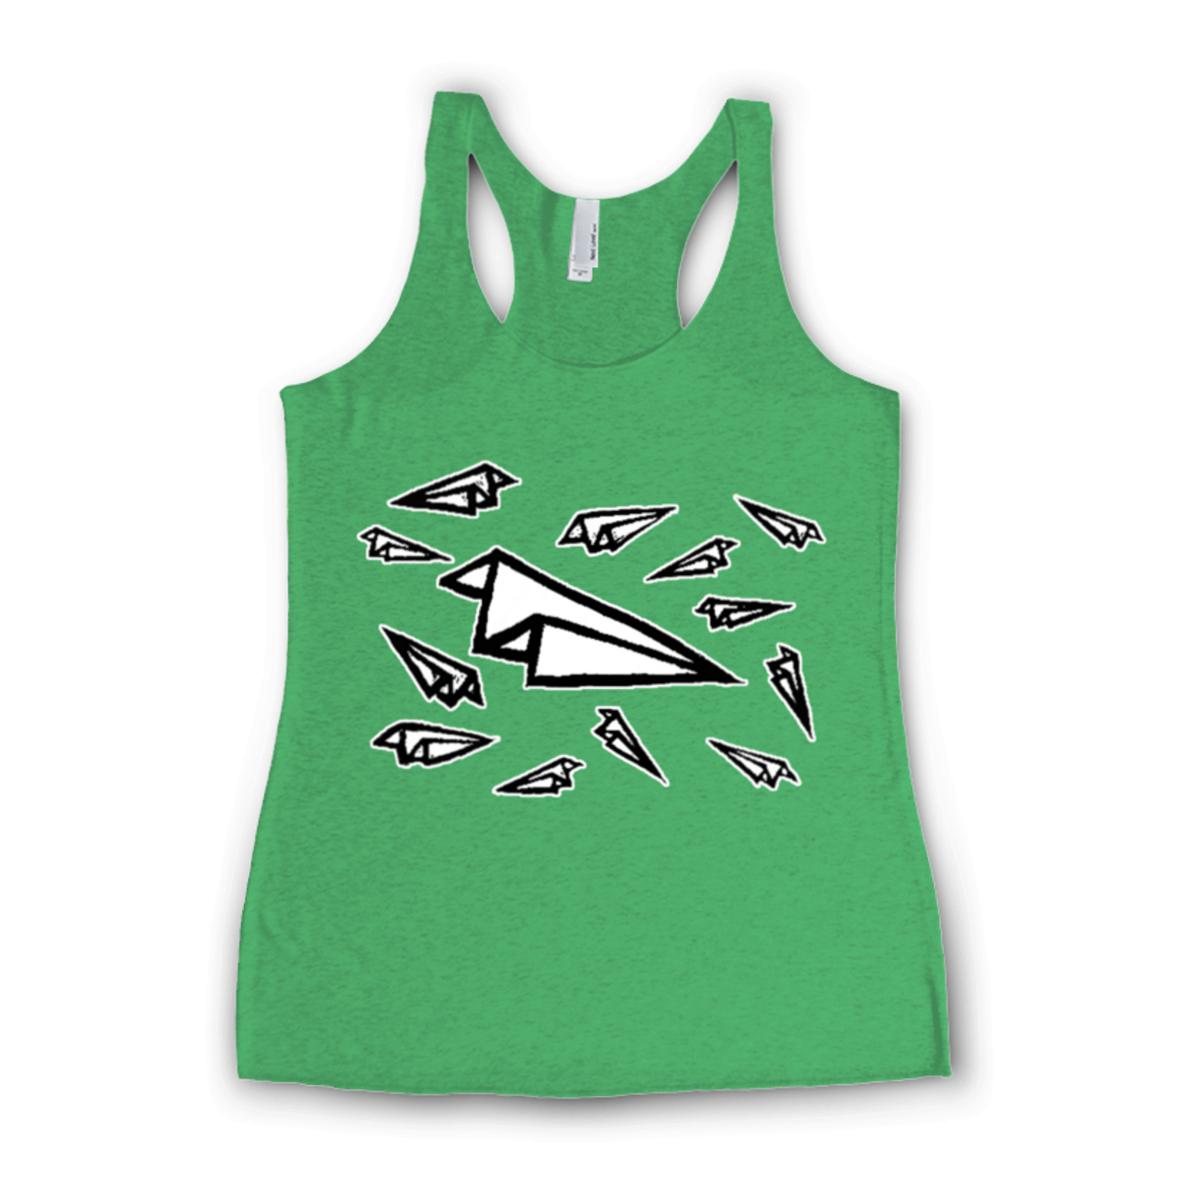 Airplane Frenzy Ladies' Racerback Tank Extra Small envy-green